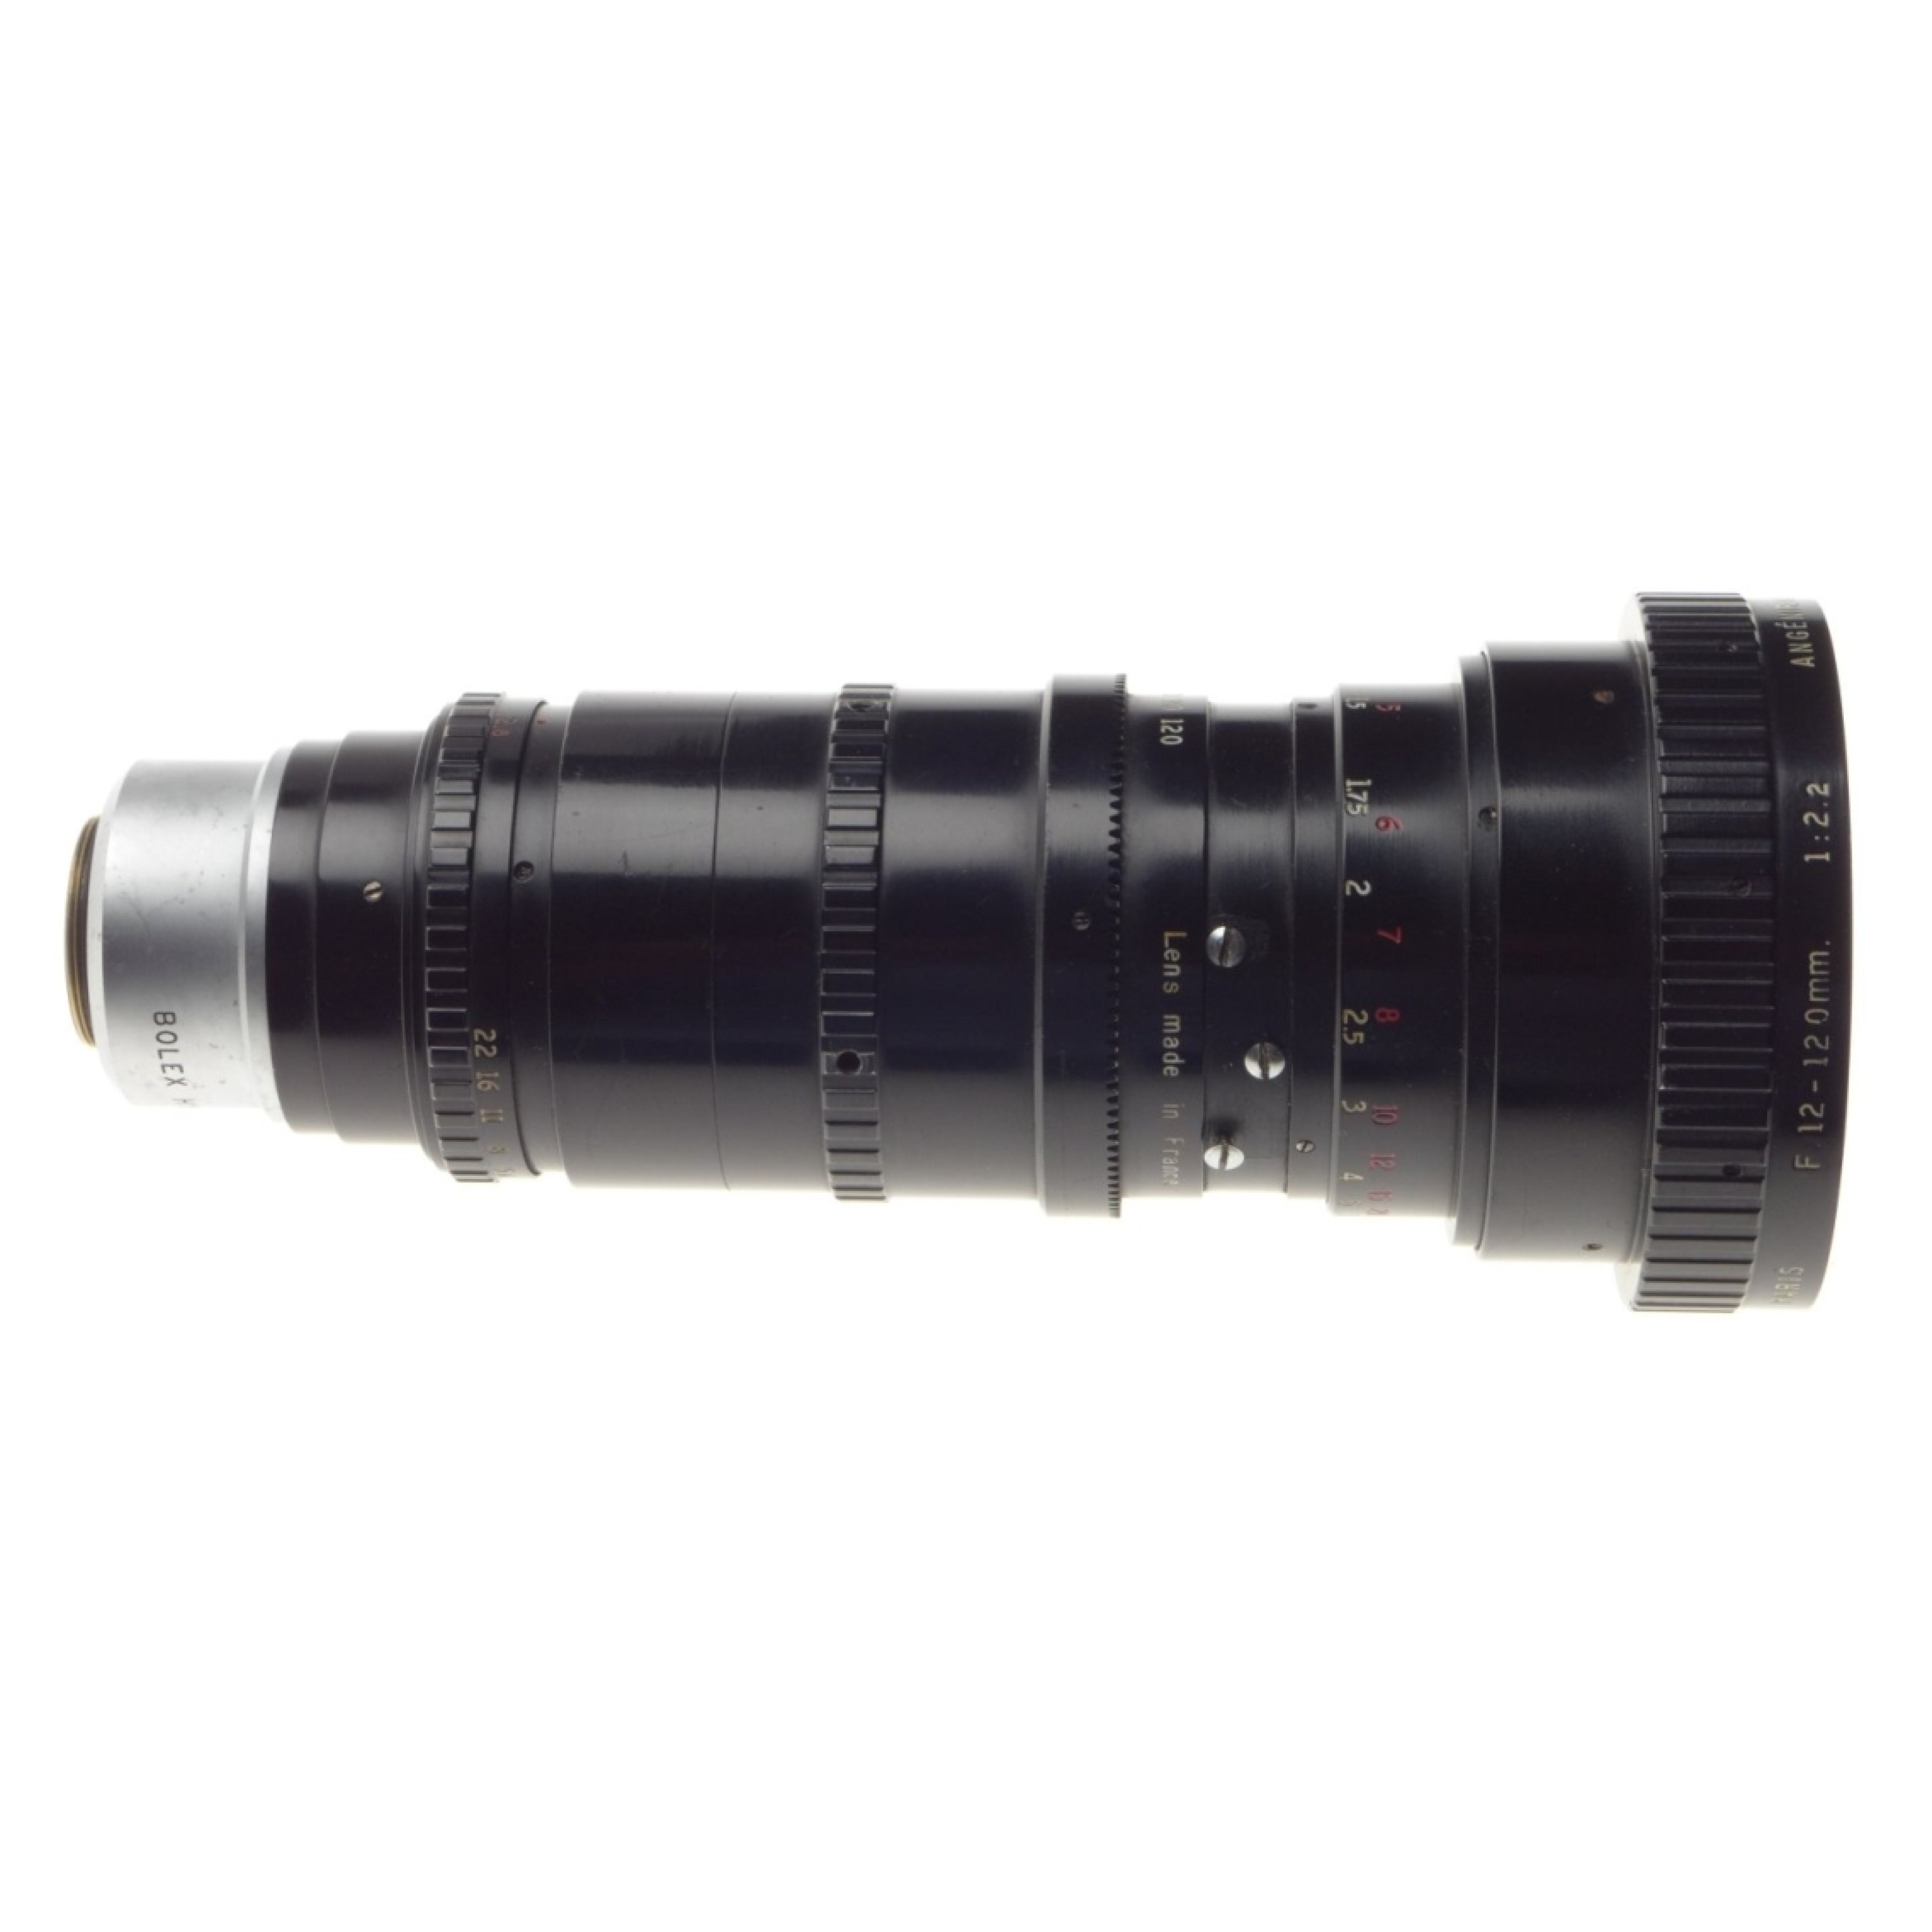 Angenieux zoom type F12-120mm 1:2.2 Black coated lens with H16